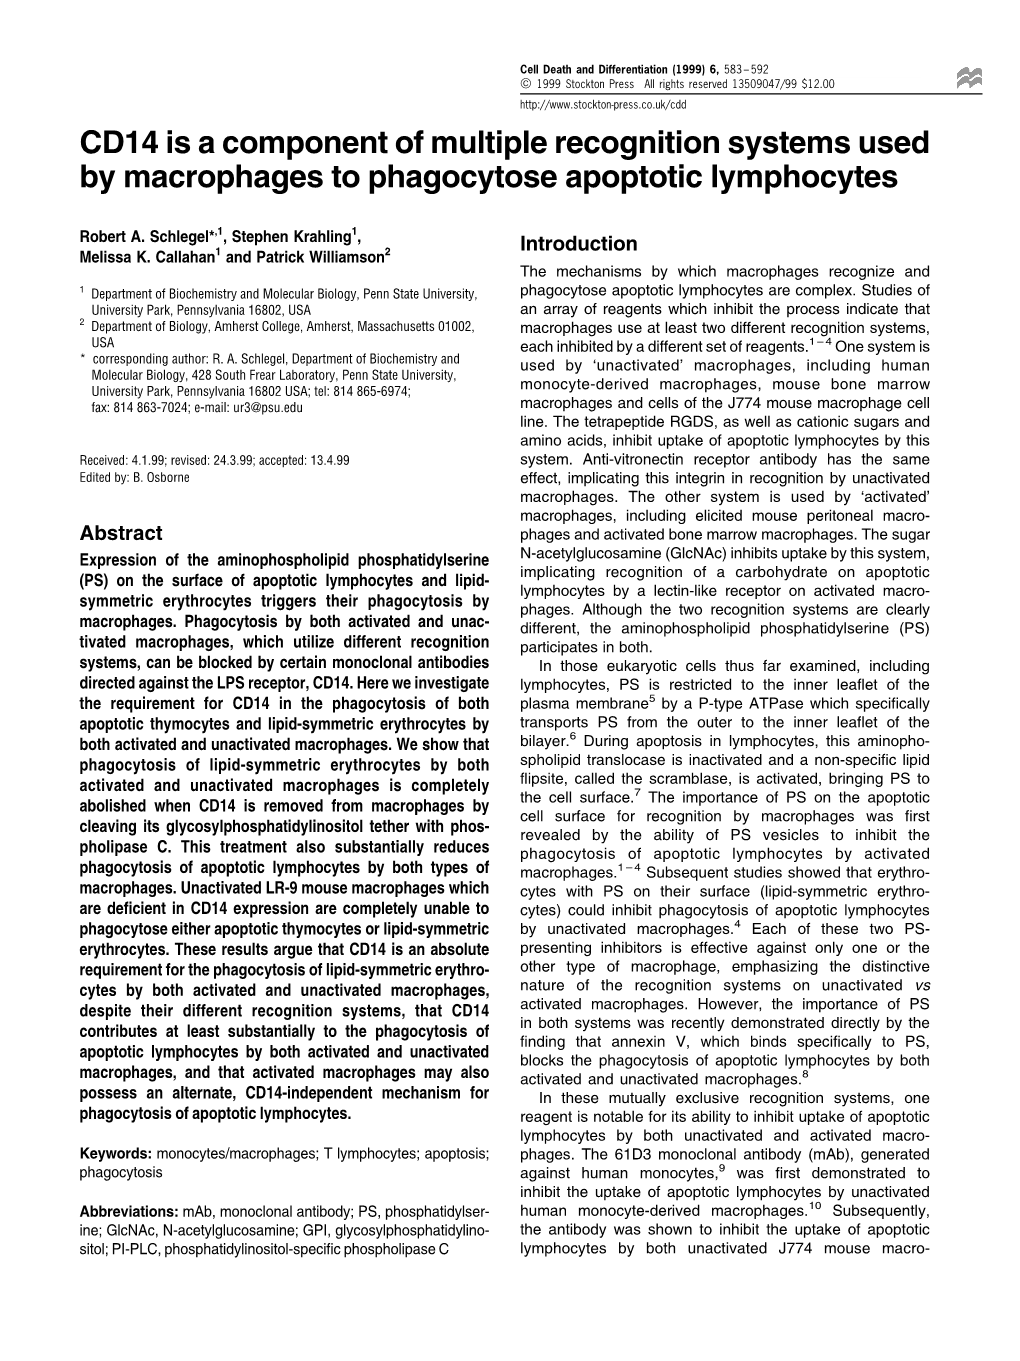 CD14 Is a Component of Multiple Recognition Systems Used by Macrophages to Phagocytose Apoptotic Lymphocytes